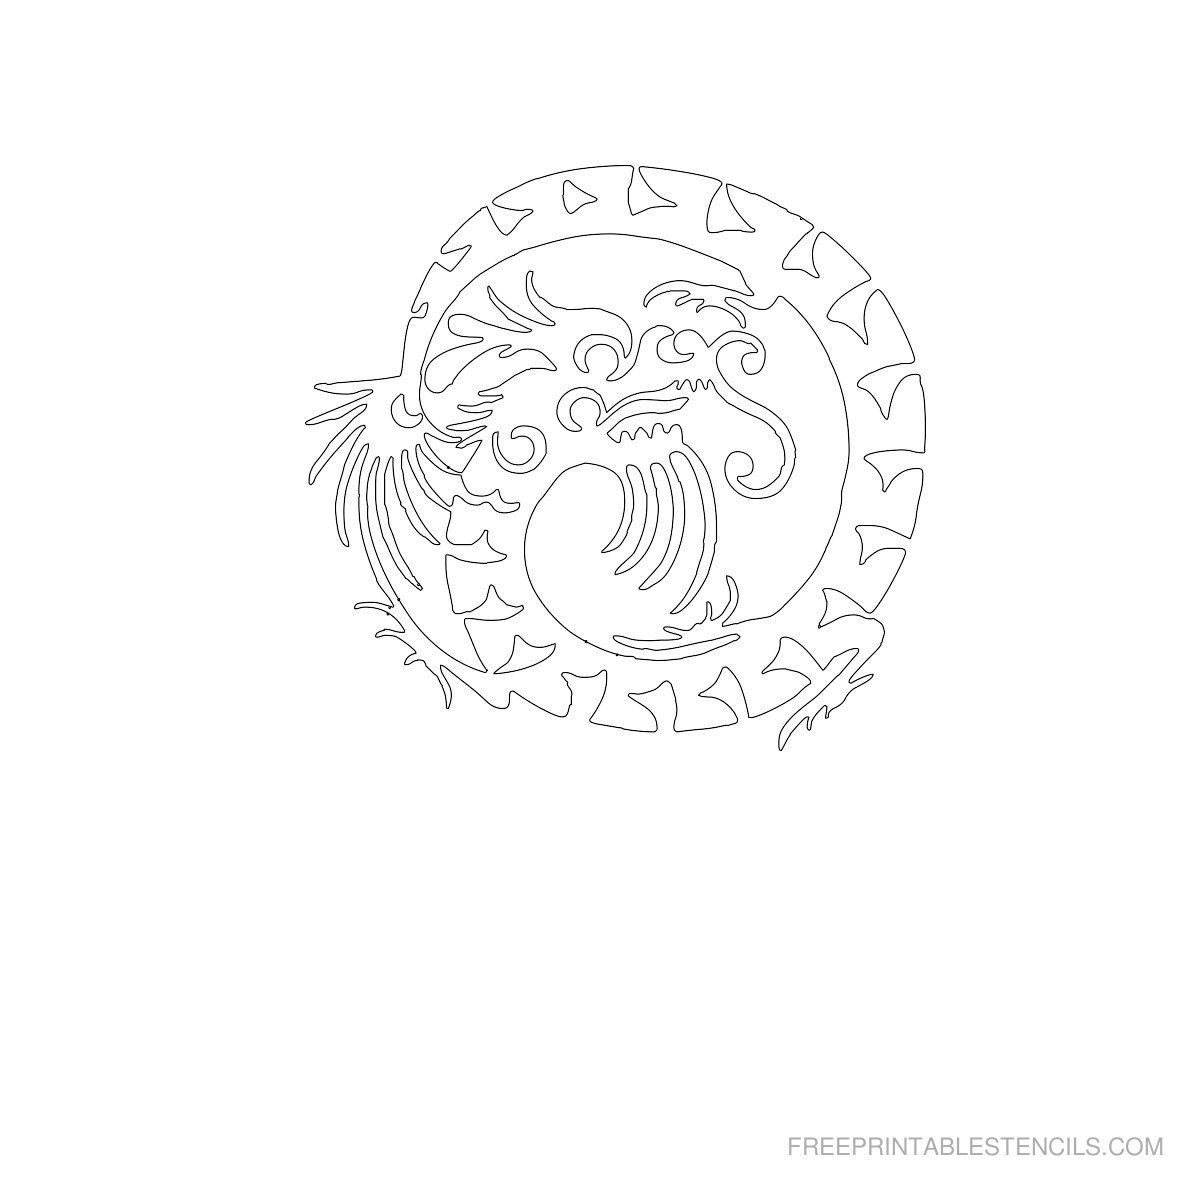 Free Printable Dragon Stencil F | Crafts To Try | Pinterest - Free Printable Dragon Stencils